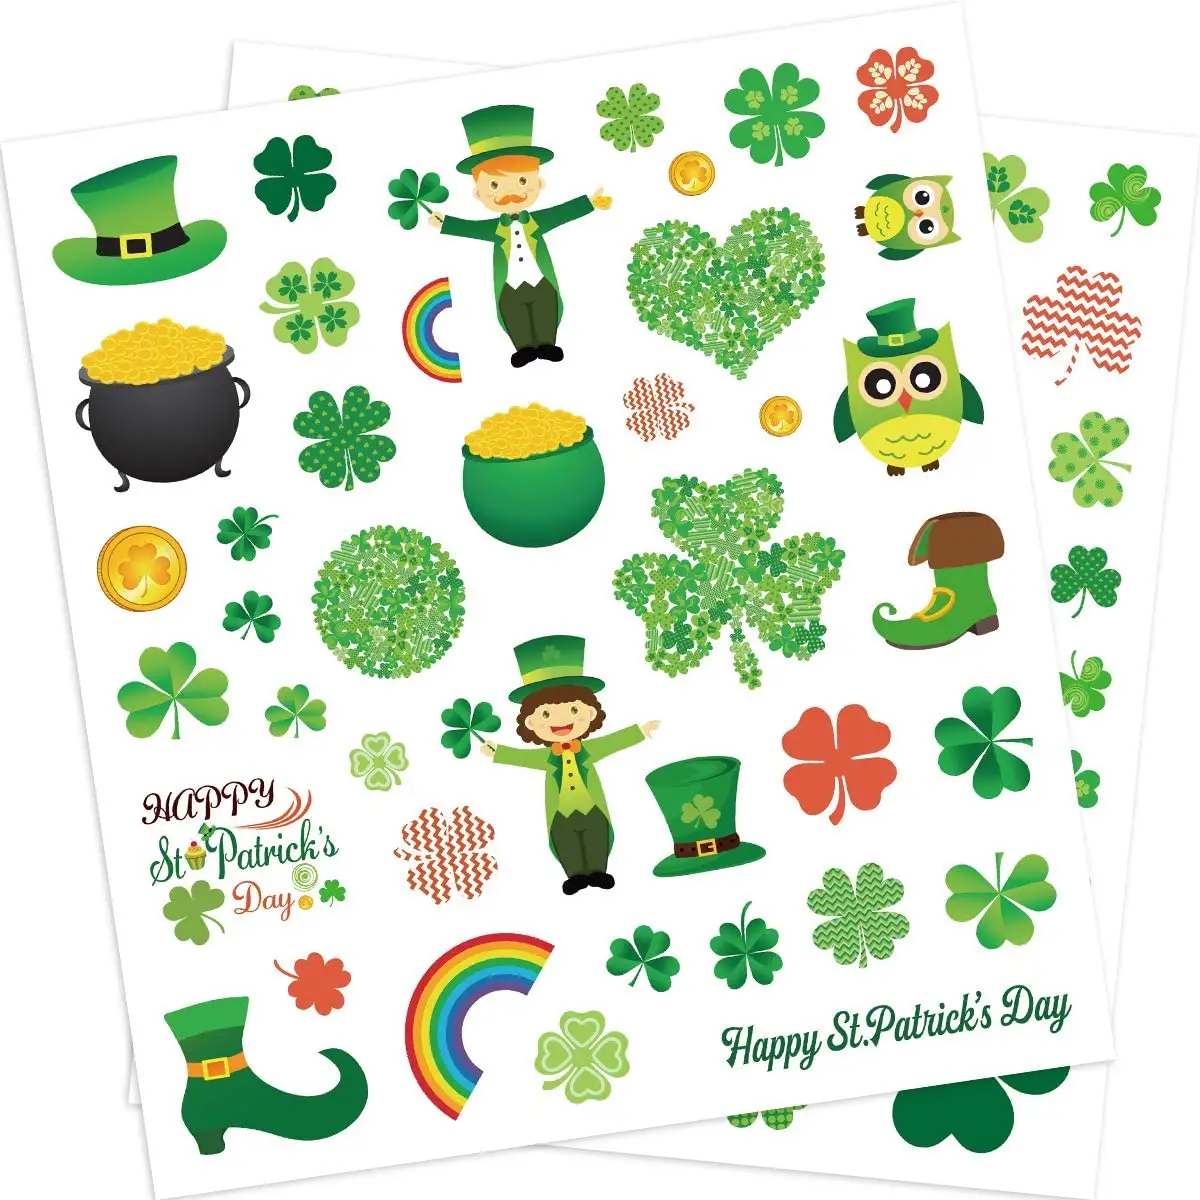 St Patrick's Day stickers Cute Aesthetic Vinyl sticker for Kids teens adults Laptop Water Bottle Envelopes Crafts sticker